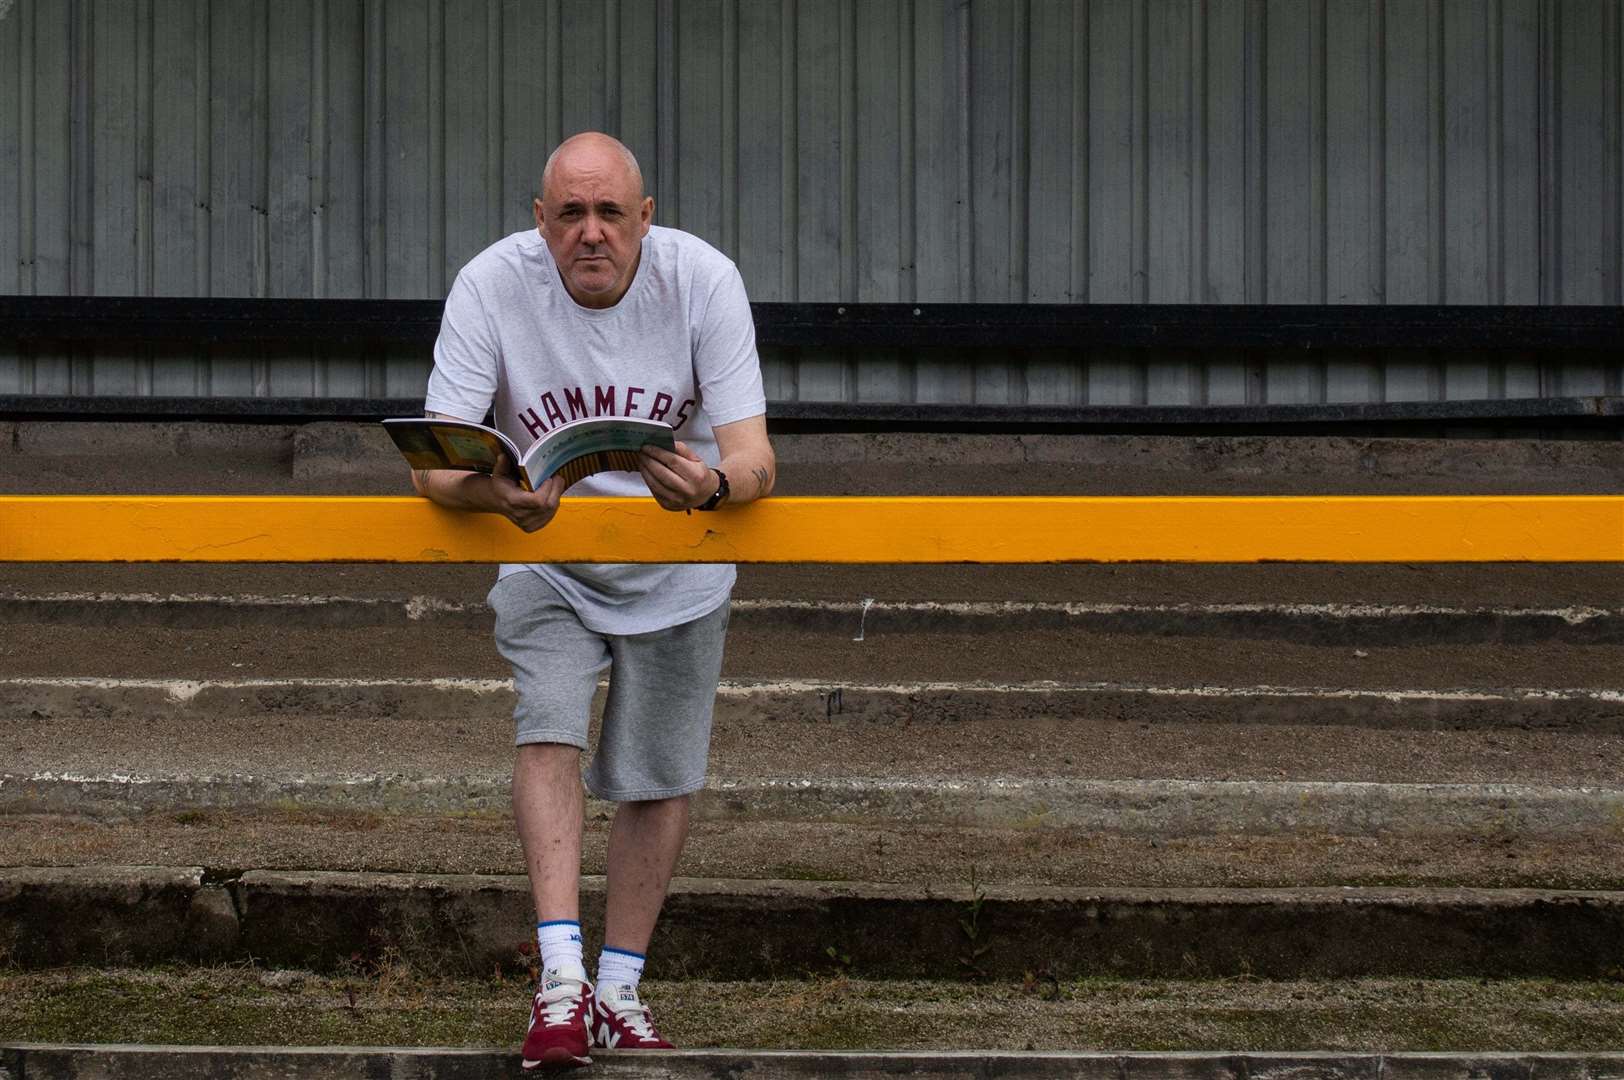 George Mackie, author of Eyes to the Ground, a picture book detailing Huntly FC's away games during the 2019-20 campaign.